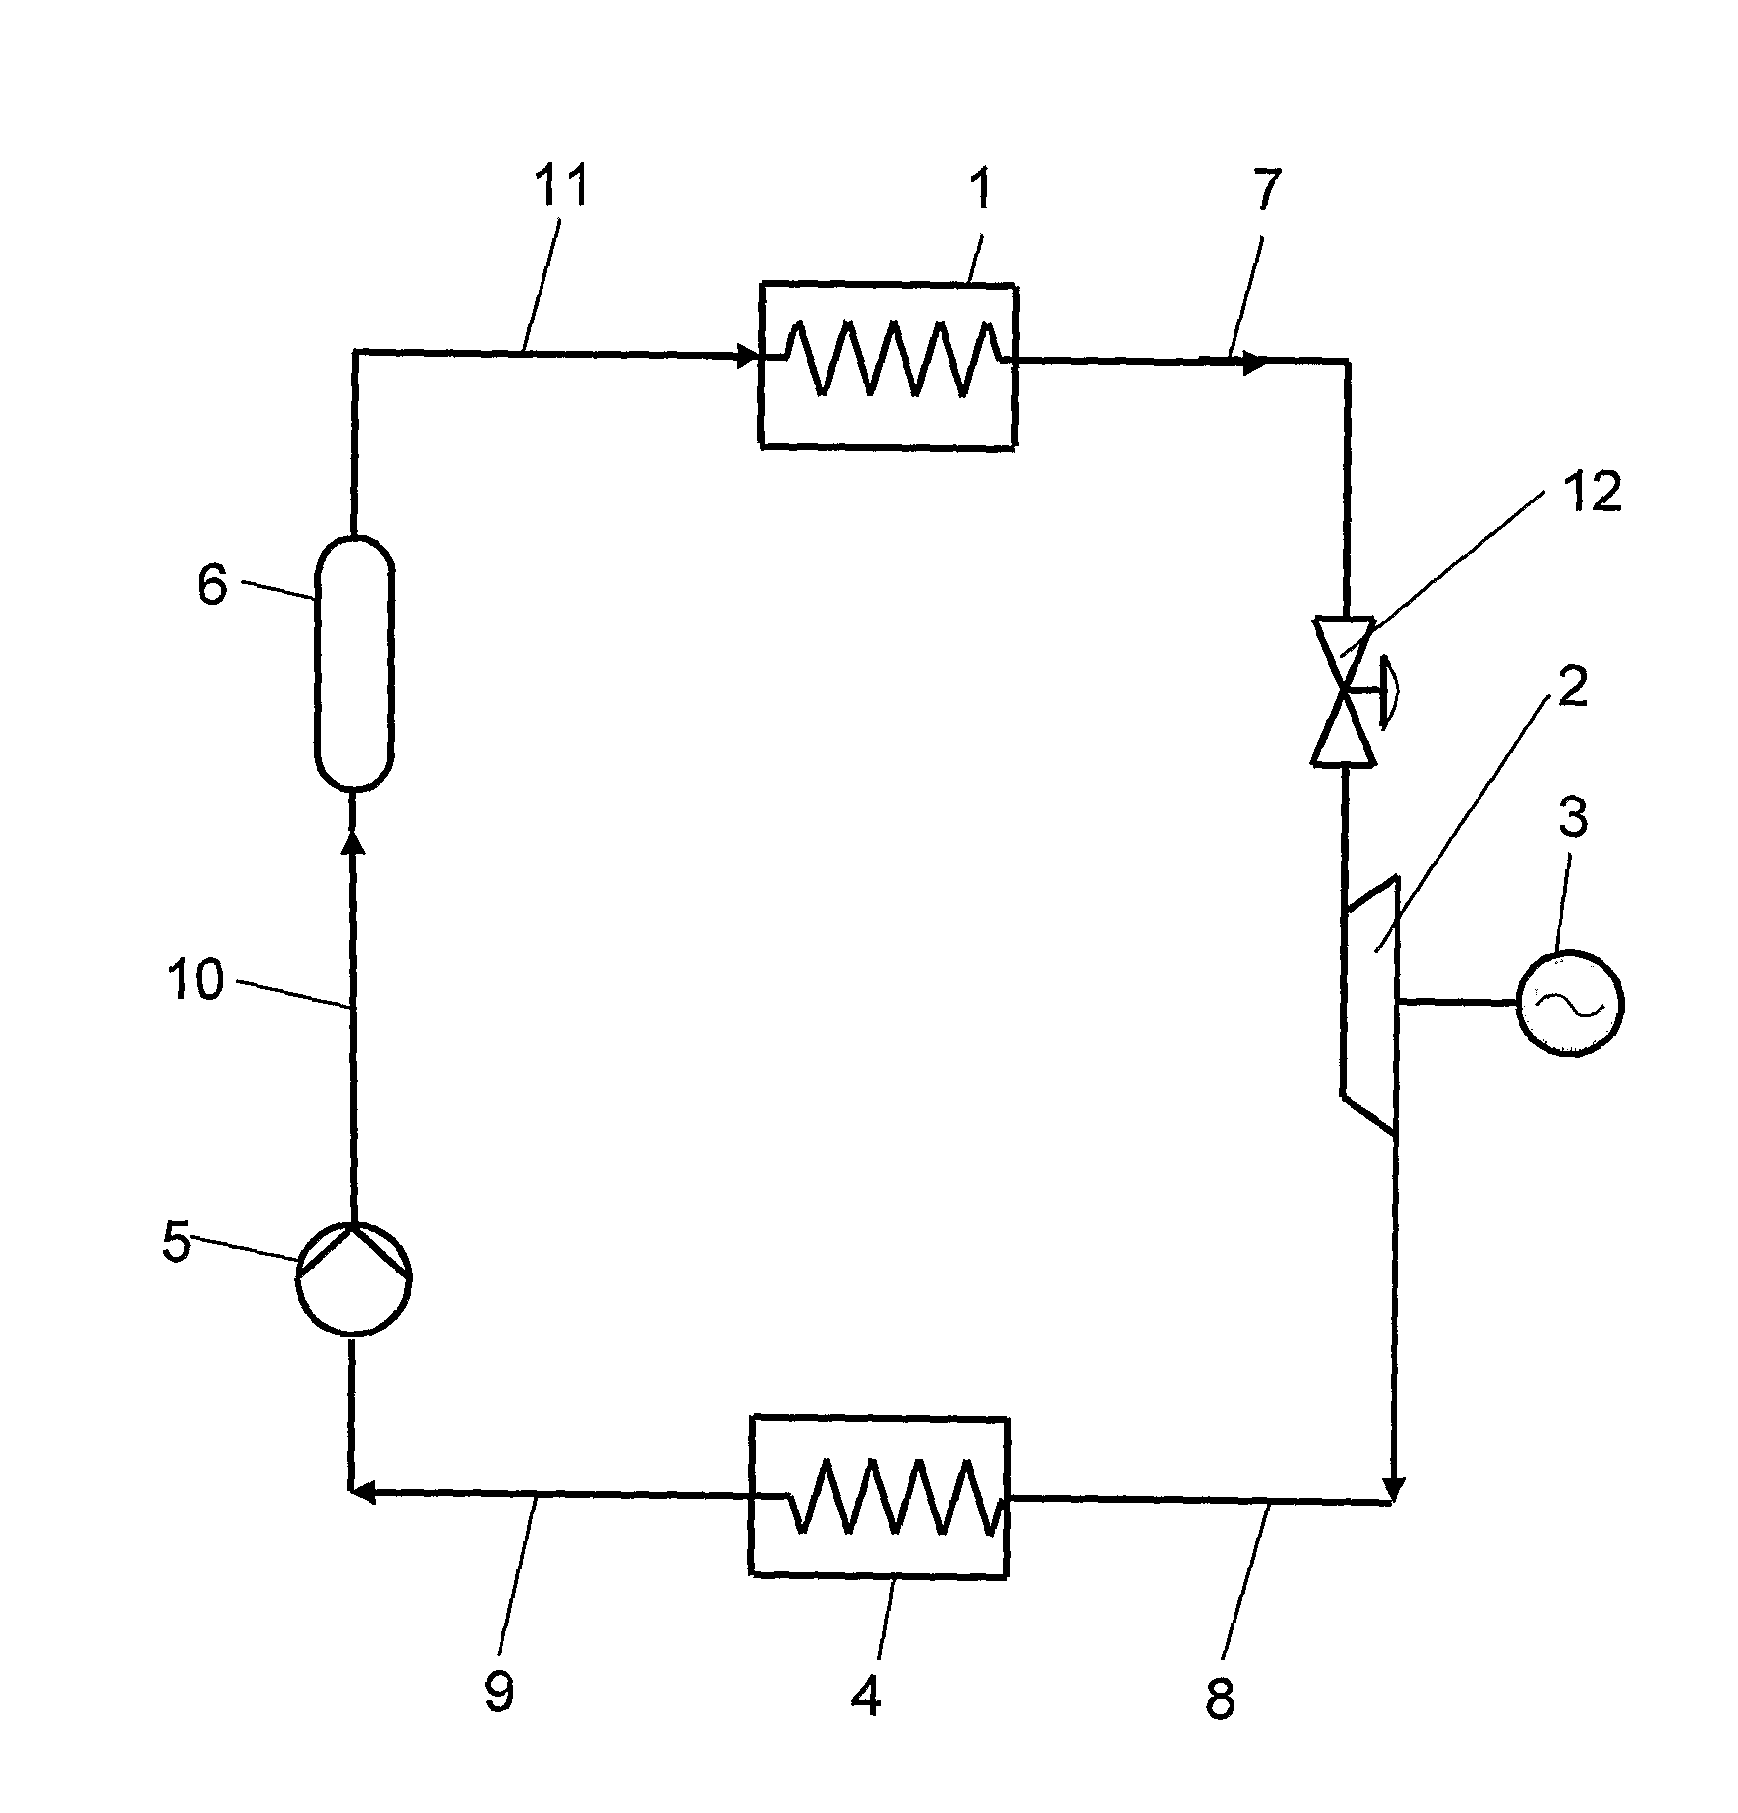 Process and device for using of low temperature heat for the production of electrical energy